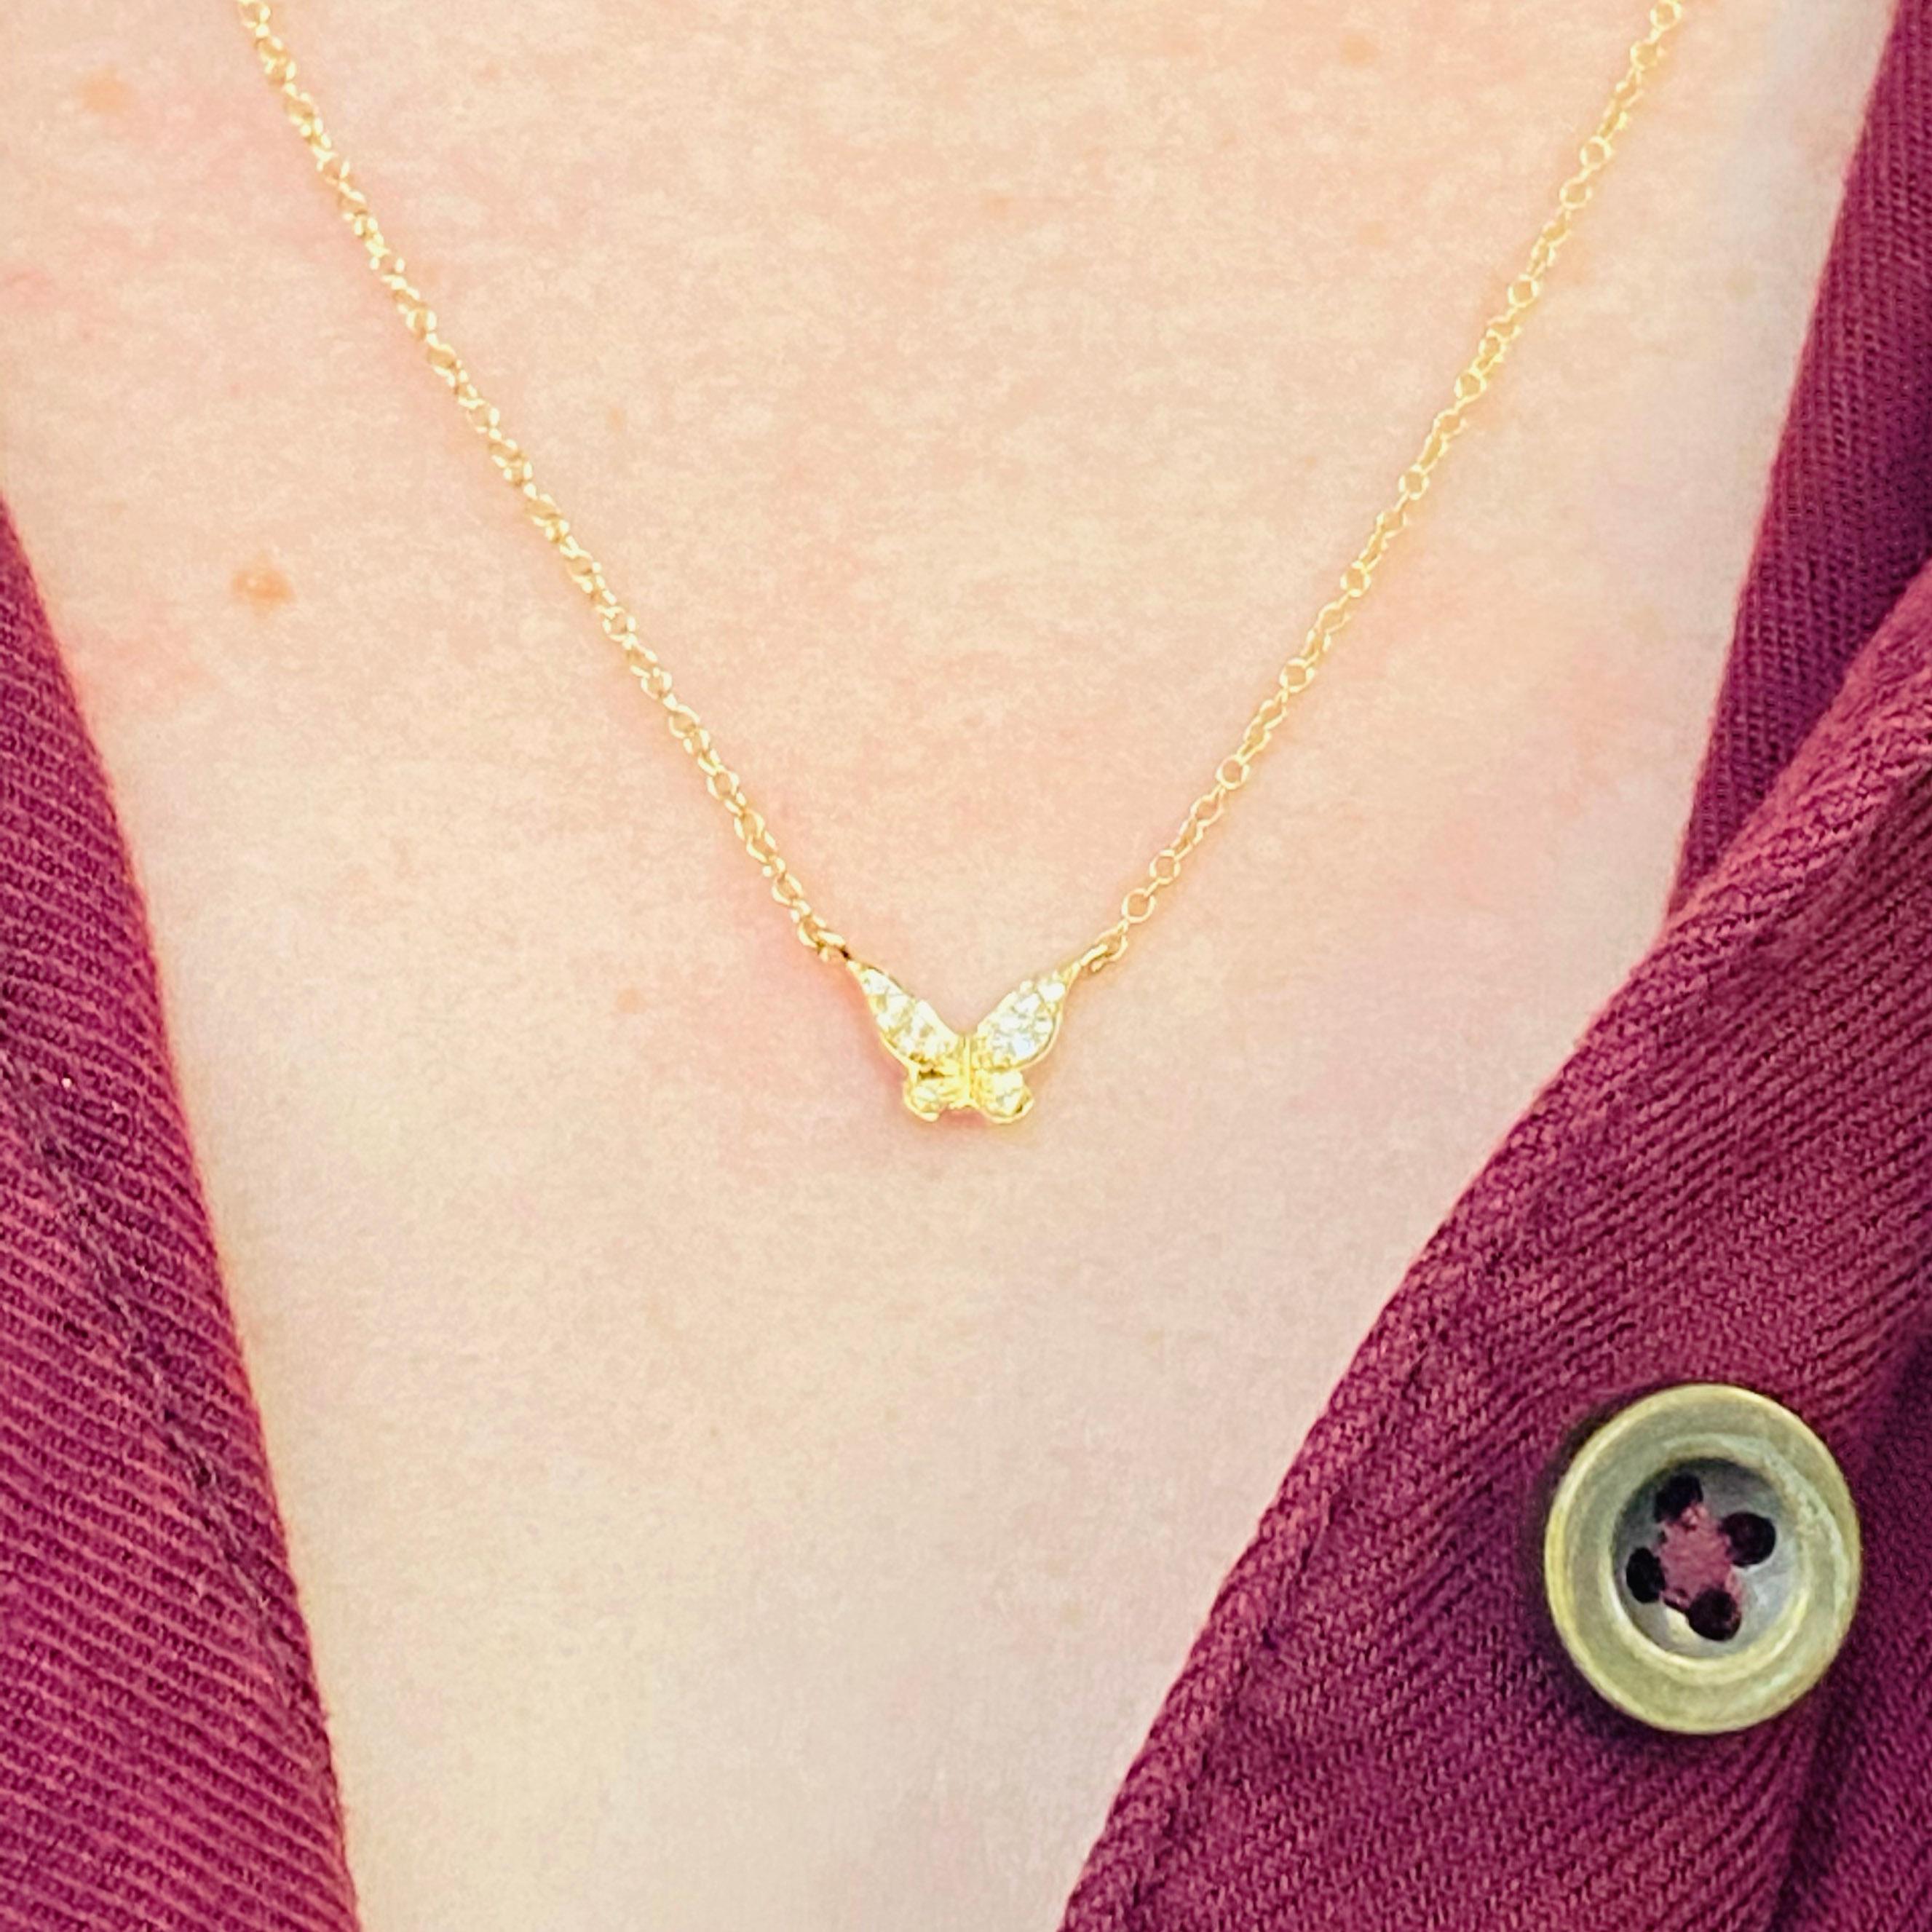 This gorgeous 14k yellow gold butterfly pendant with pave diamonds is sure to put a smile on anyone's face! This necklace looks beautiful worn by itself and also looks wonderful in a necklace stack. Its amazing adjustable chain design allows it to